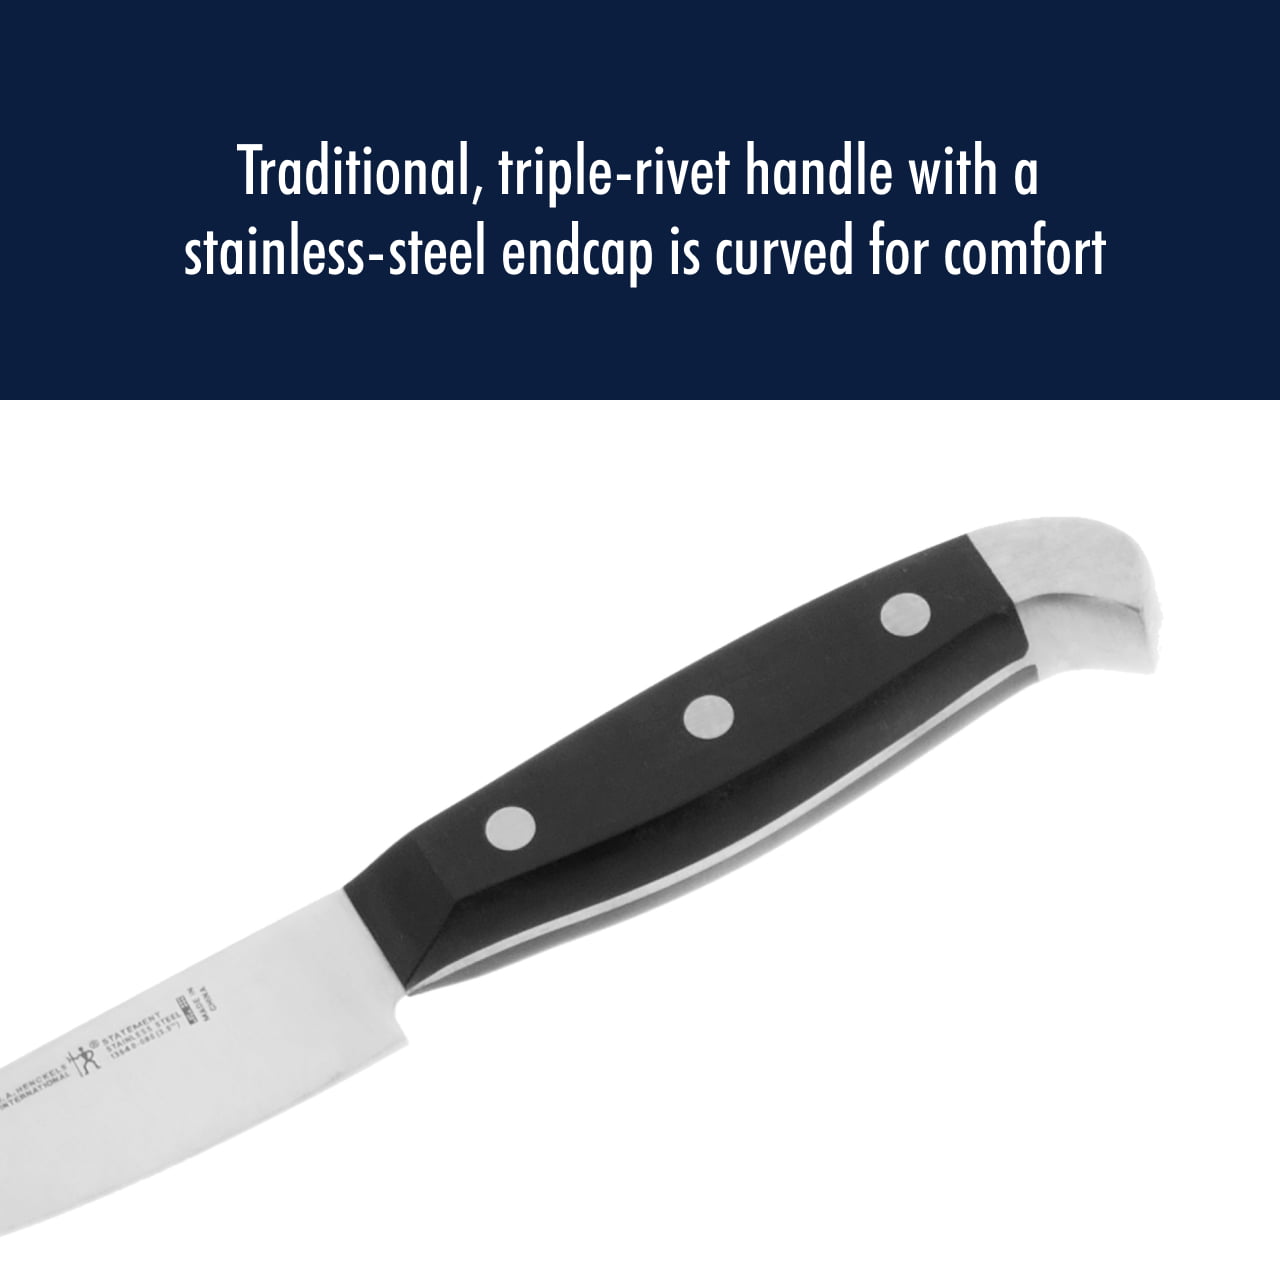 I've been eyeing up the Henckel knife set. It was $69.99 a few weeks ago. I  go to pick it up today and it's now $249.99! What gives? Why such a huge